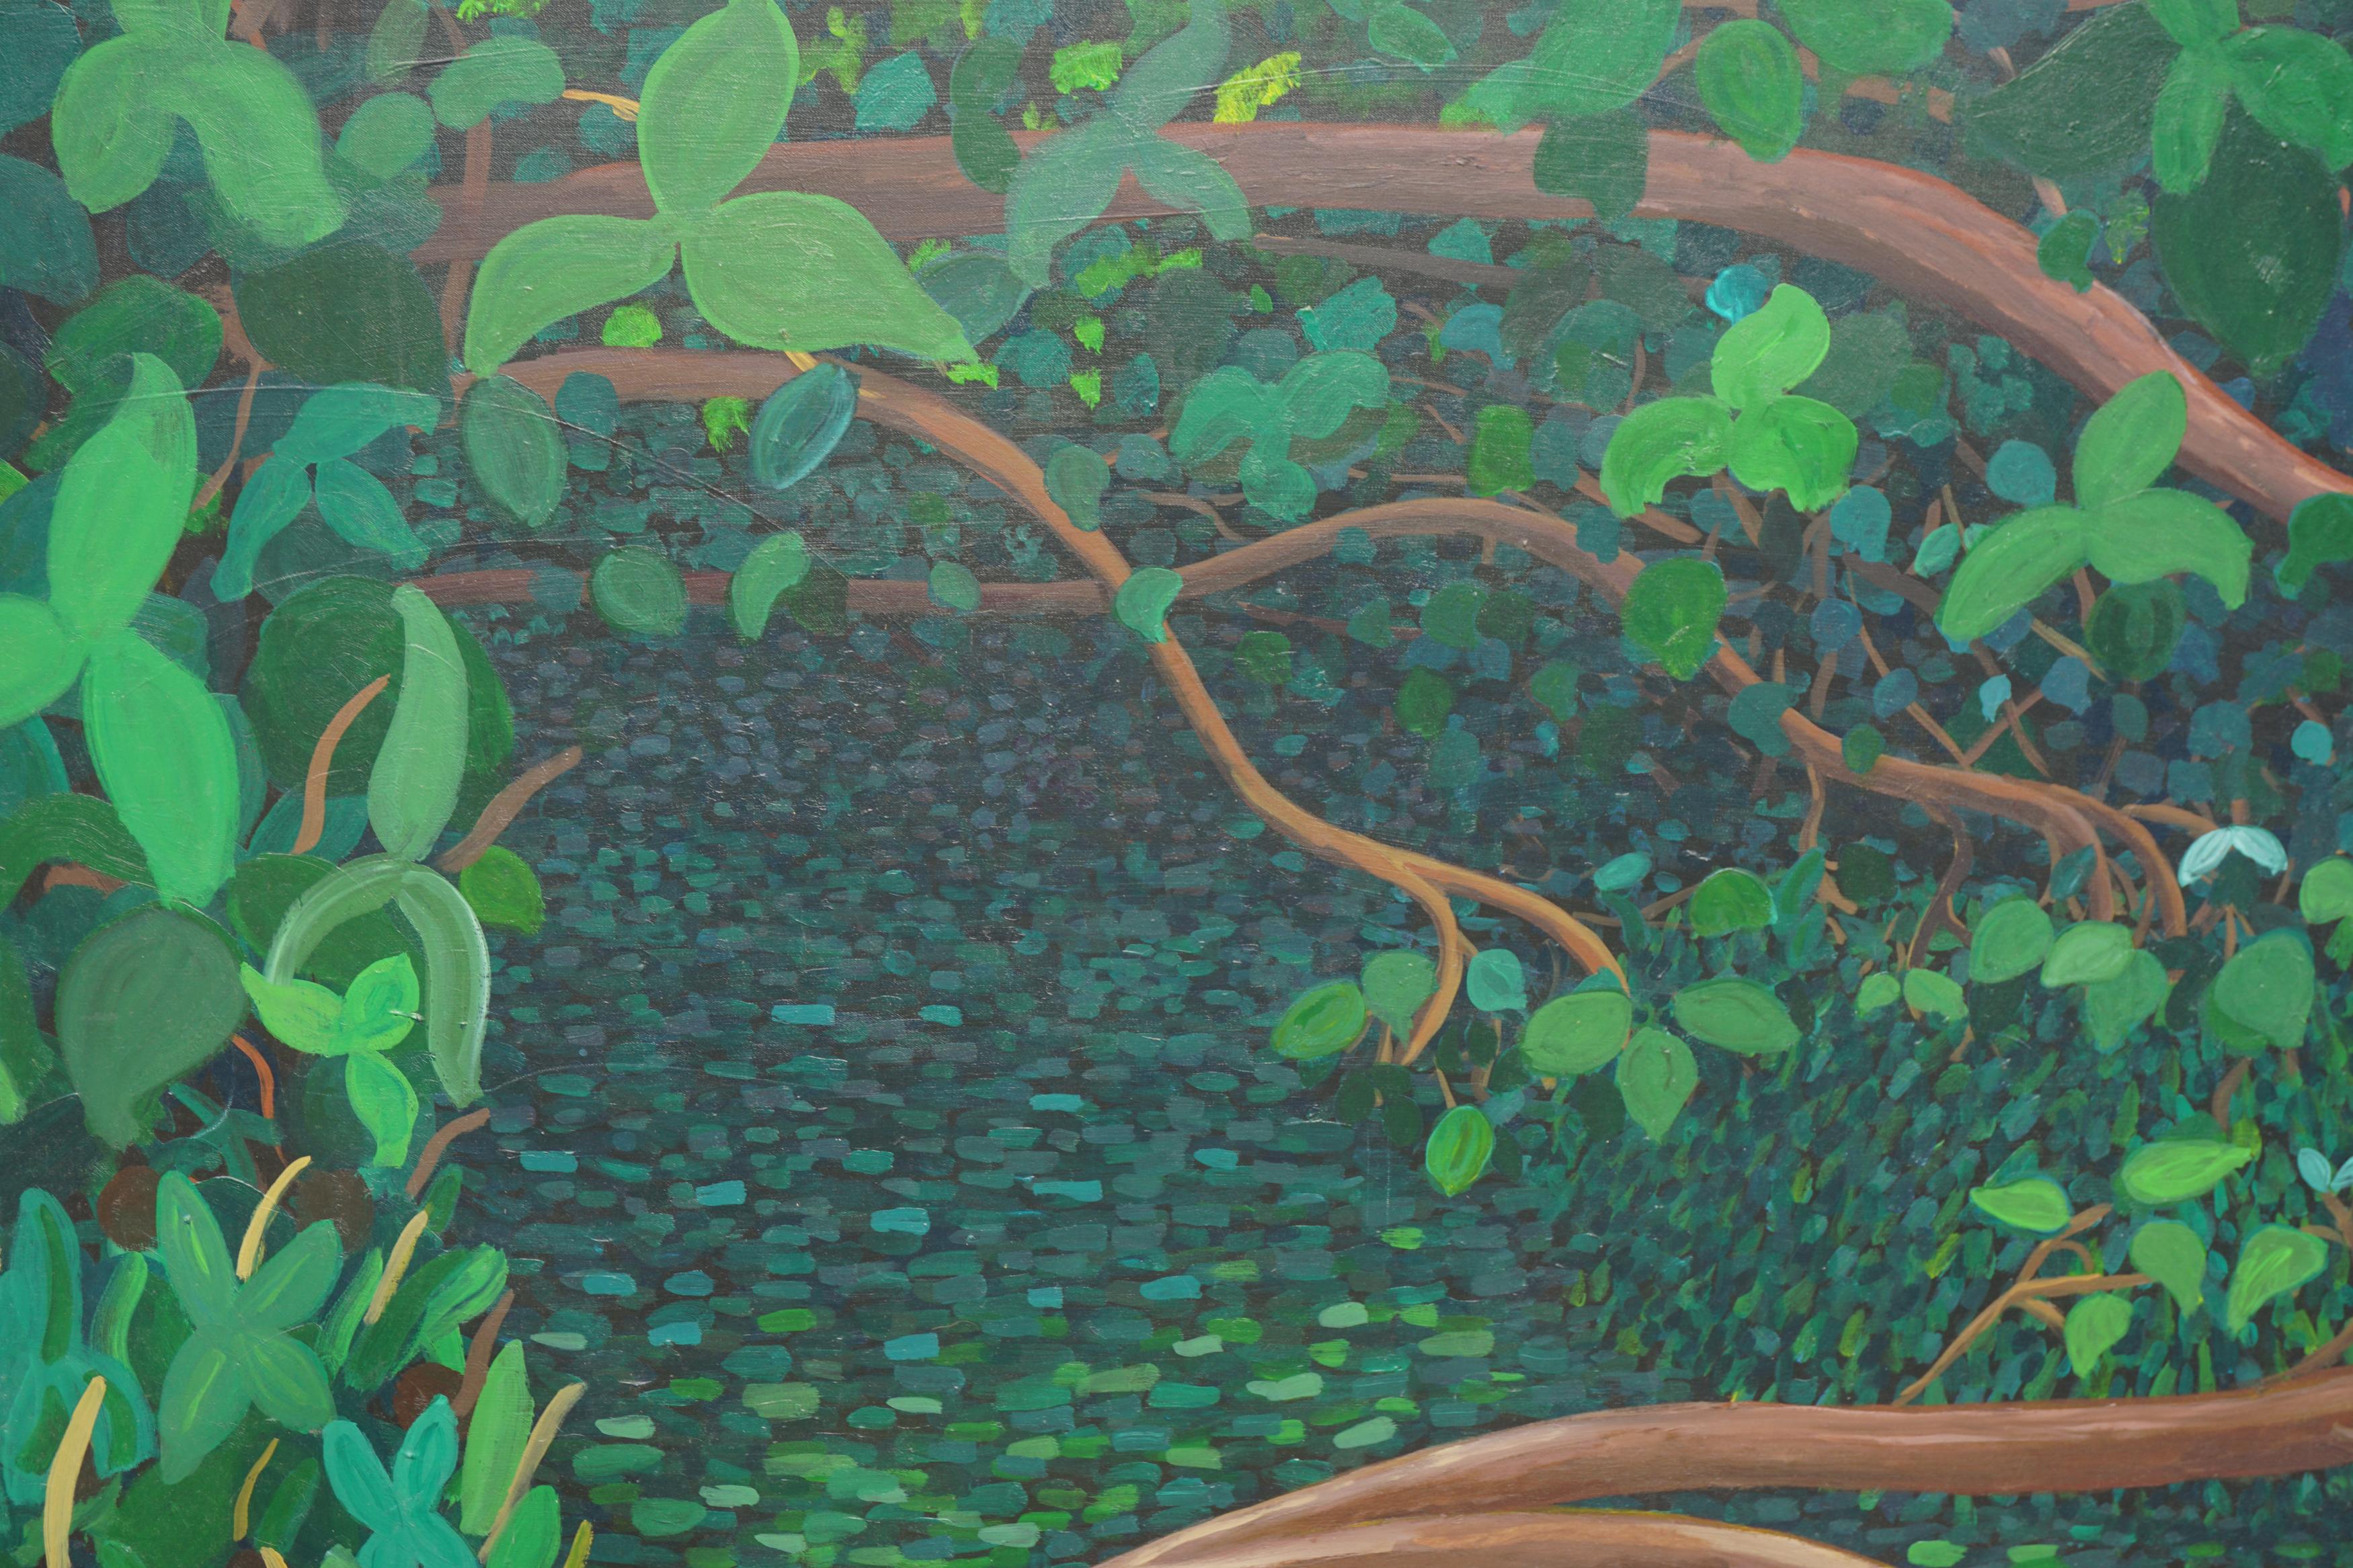 Heart of the Rain Forest, Large Scale Landscape - Painting by J. D. Sneed